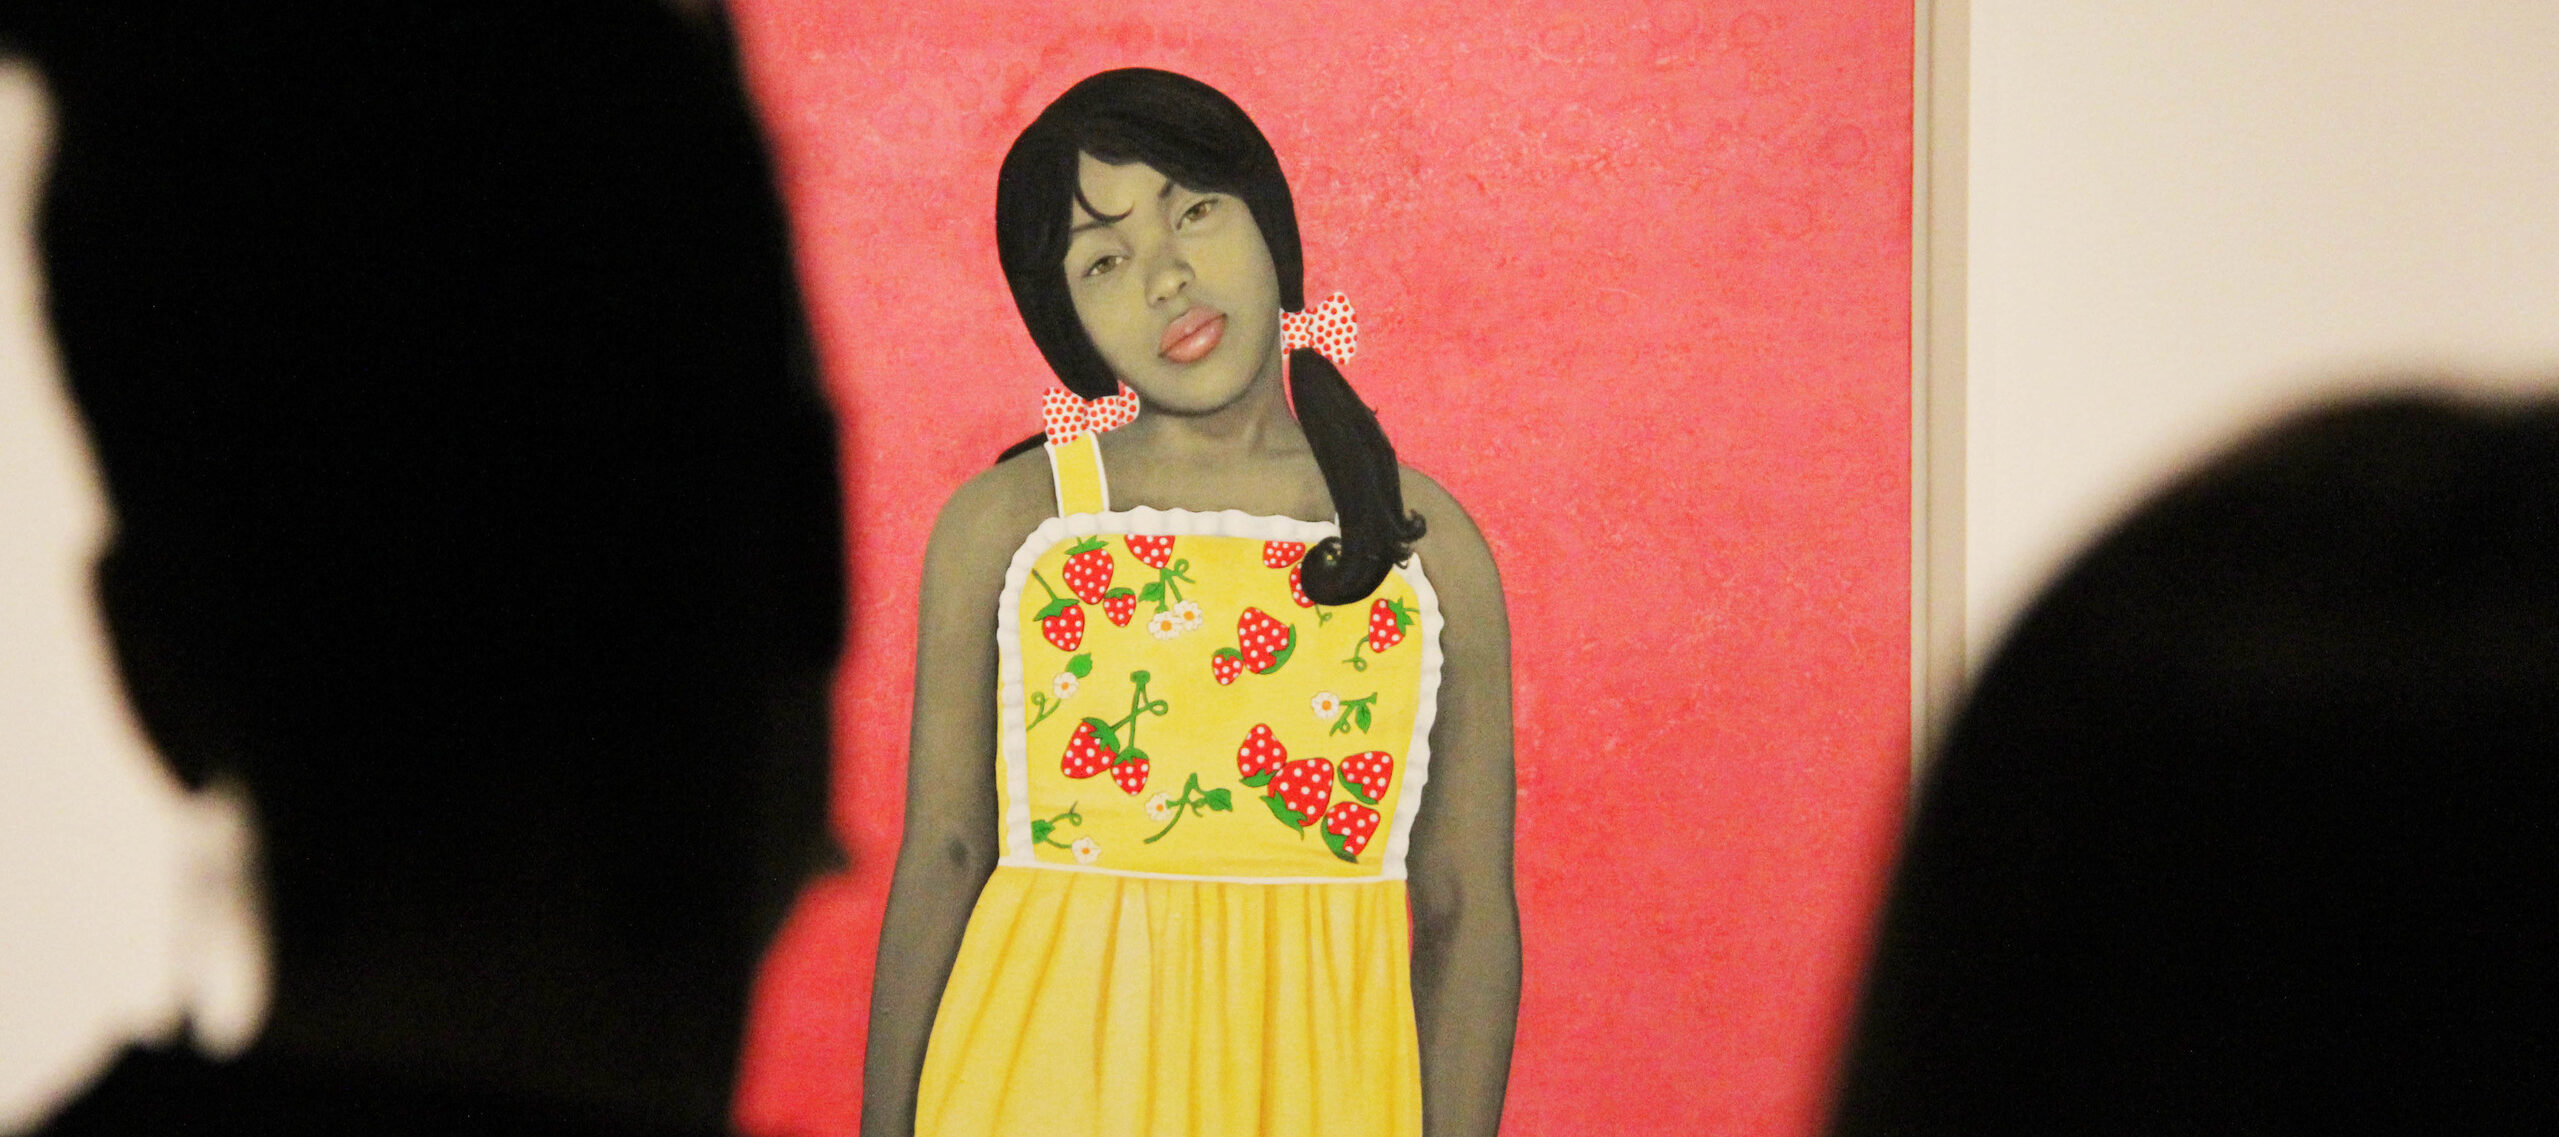 Vibrant painting of a young lady with medium skin tone staring out against a bright pink background. The painting is partially obscured by the silhouetted heads of museum visitors.